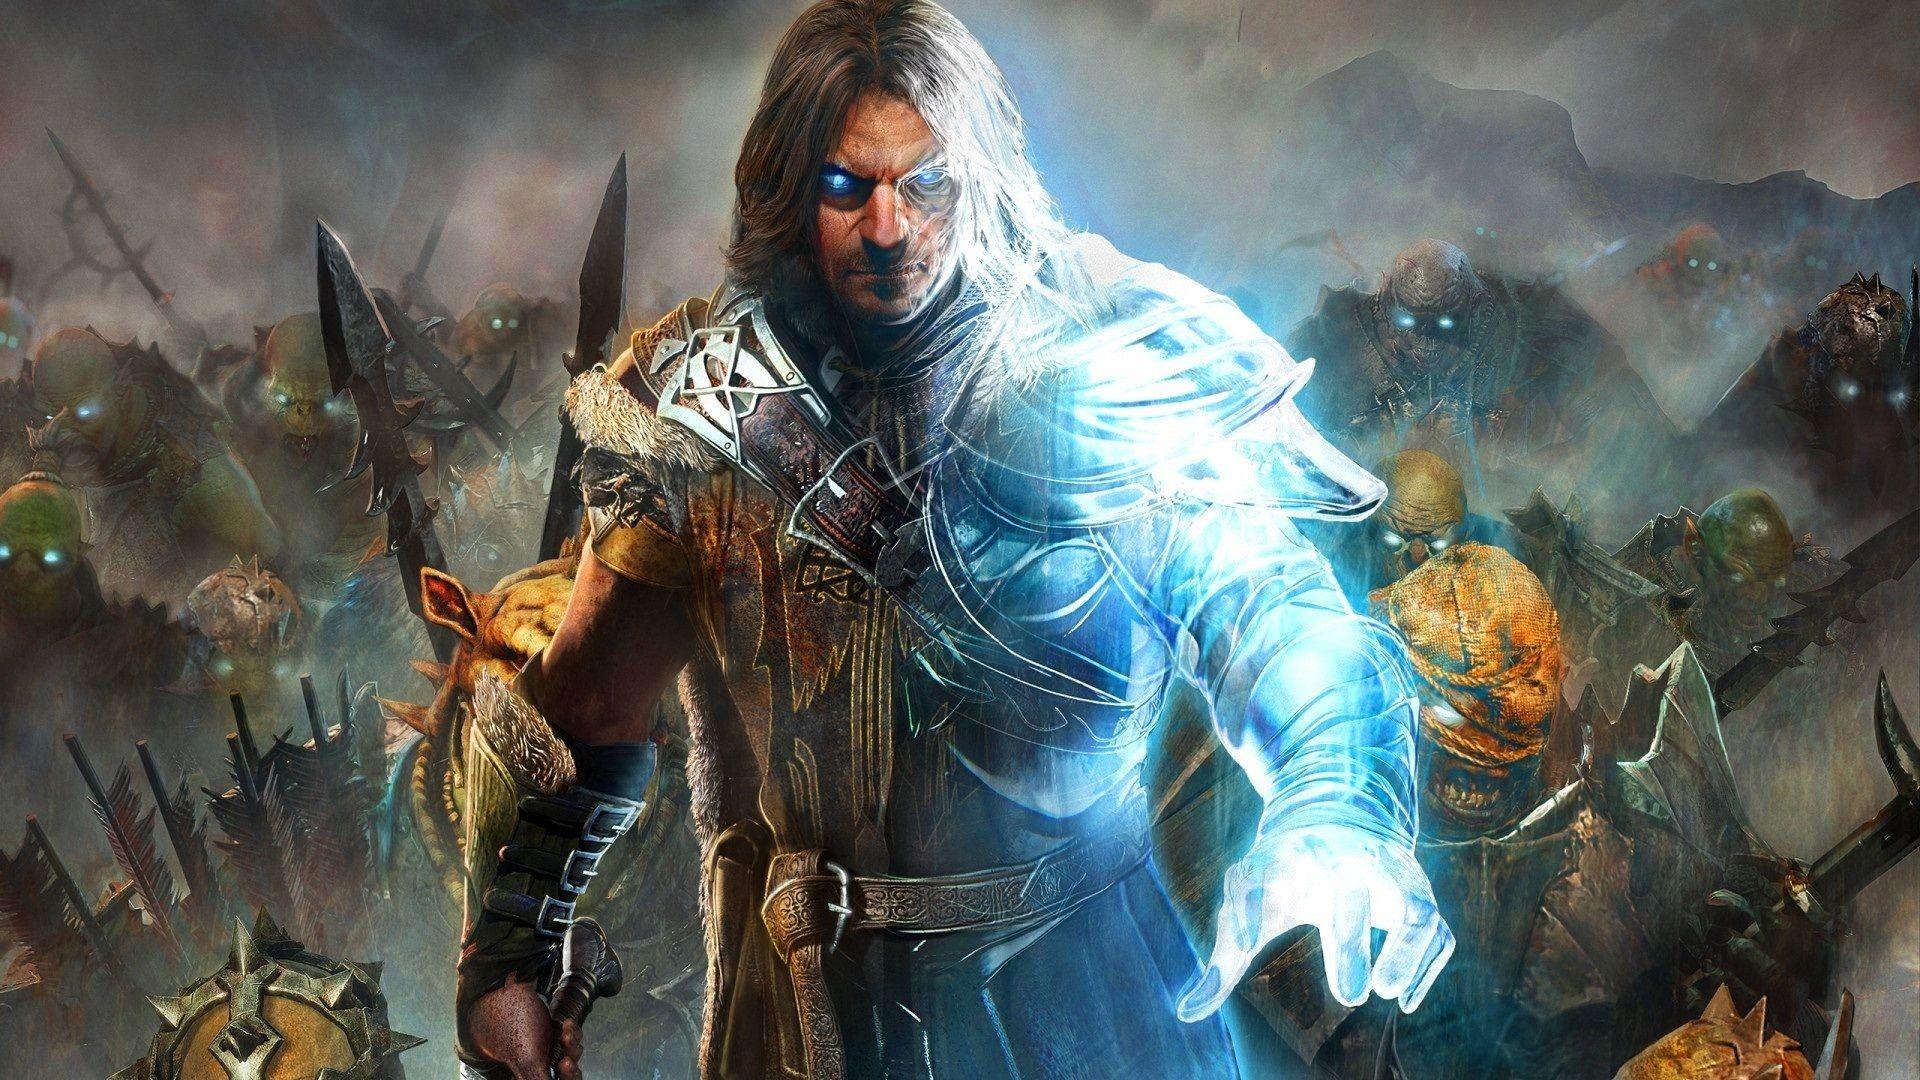 720p shadow of mordor images